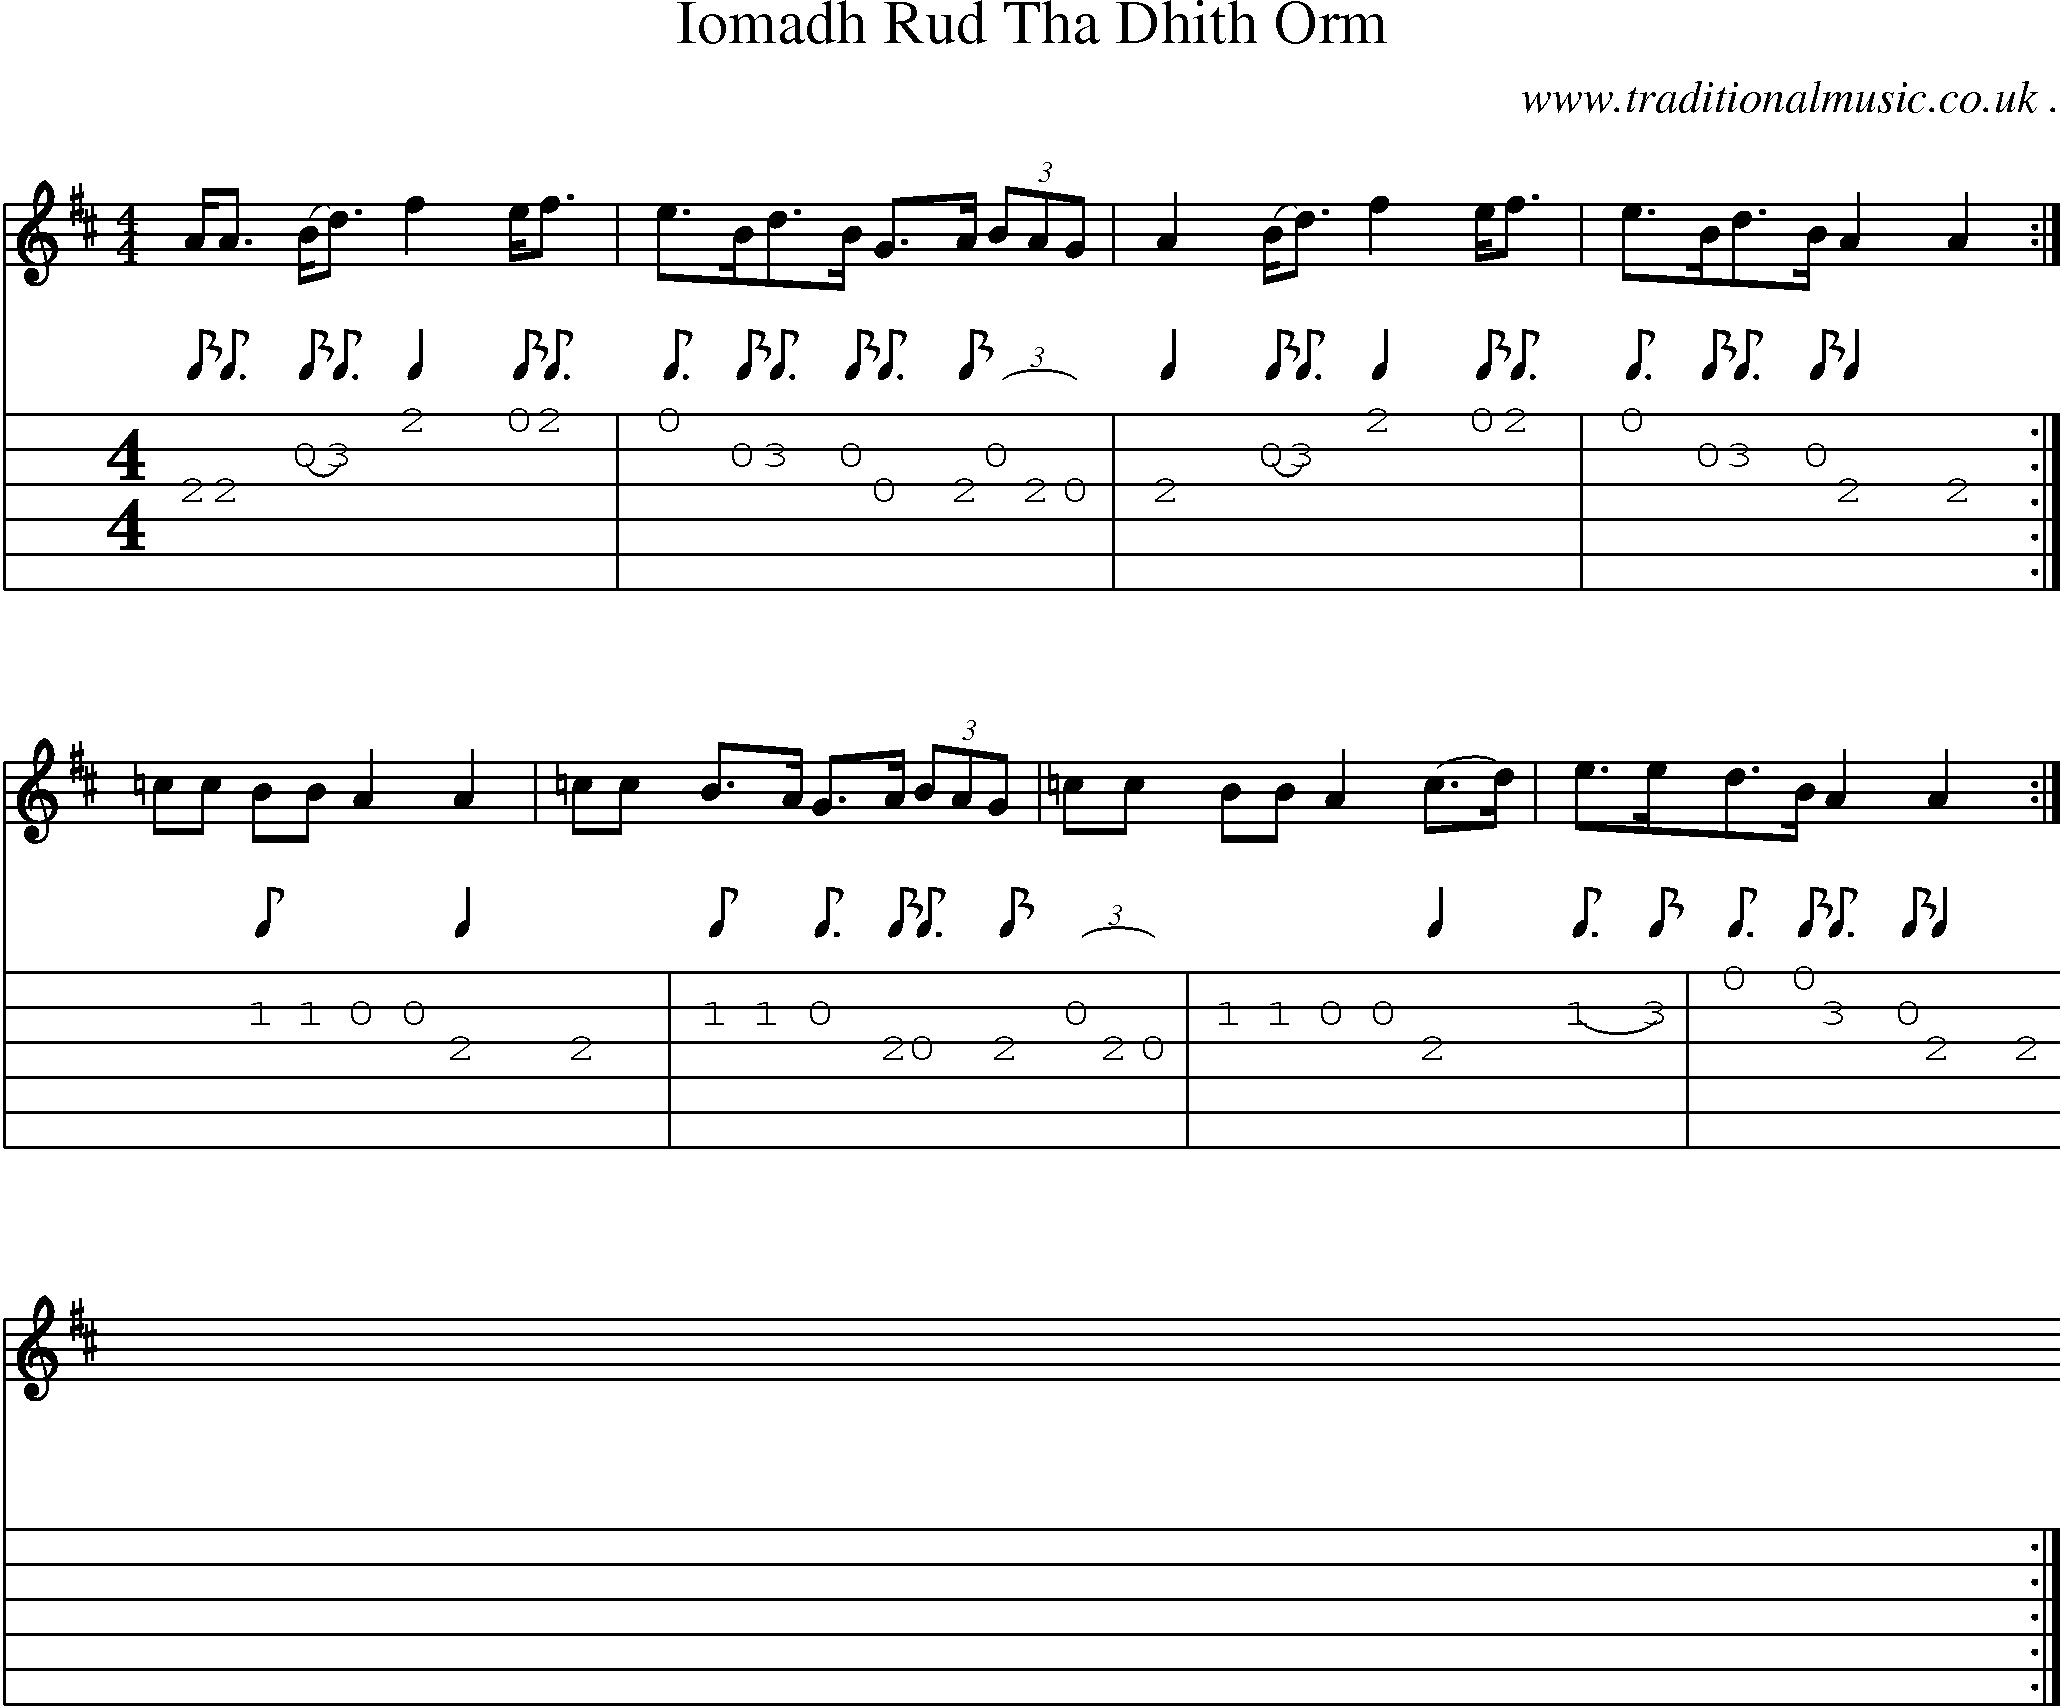 Sheet-music  score, Chords and Guitar Tabs for Iomadh Rud Tha Dhith Orm